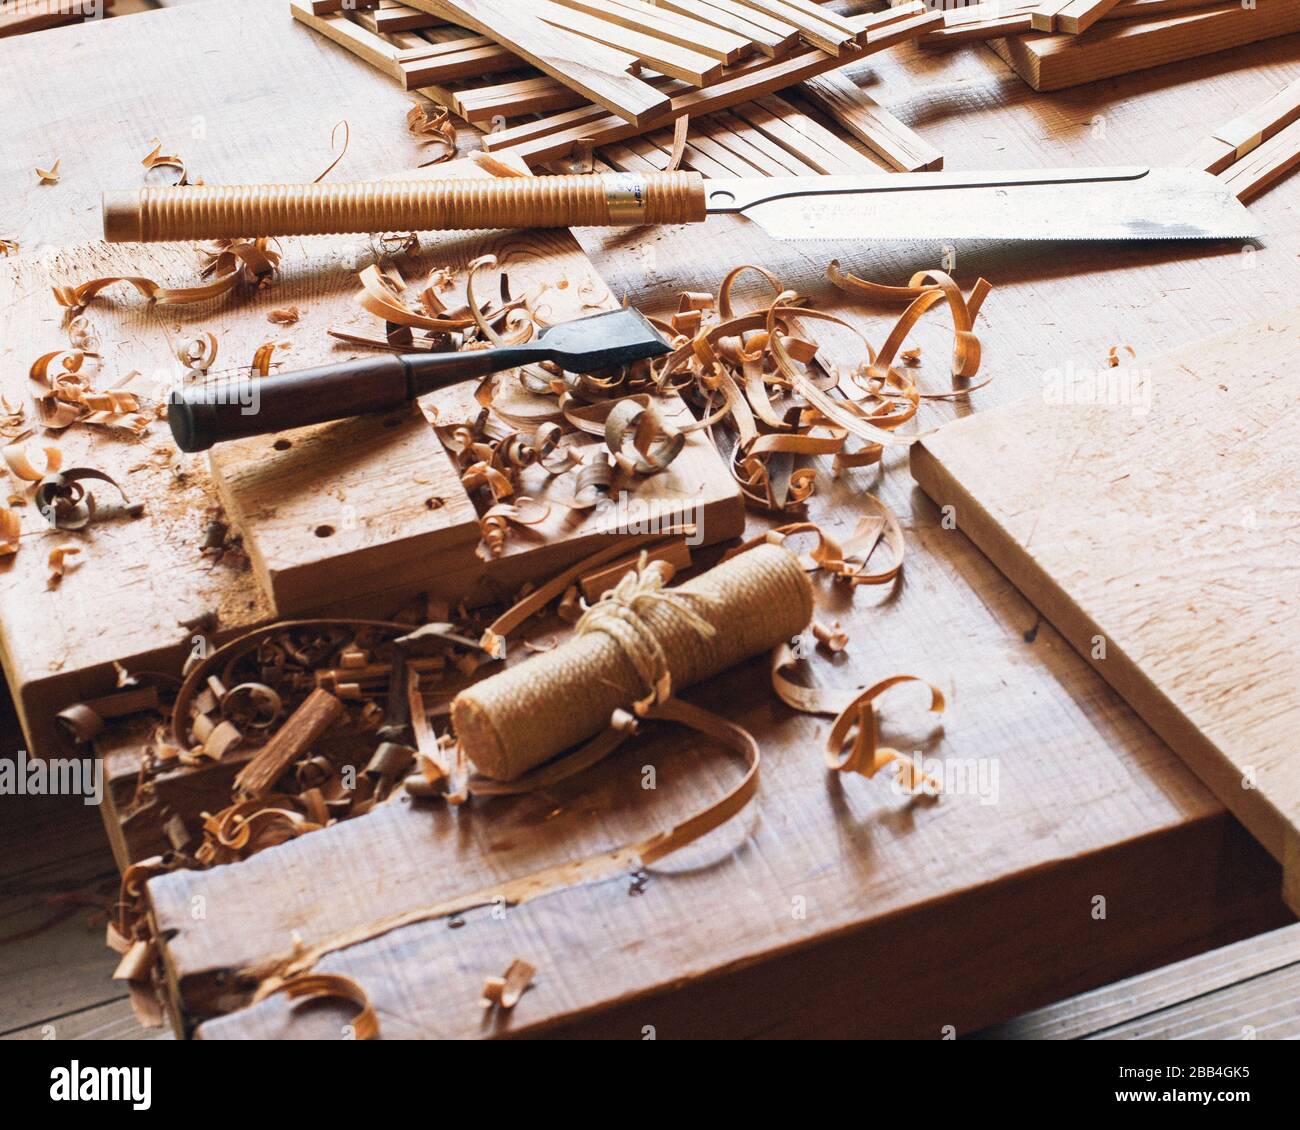 Japanese Woodworking Tools Stock Photo - Alamy